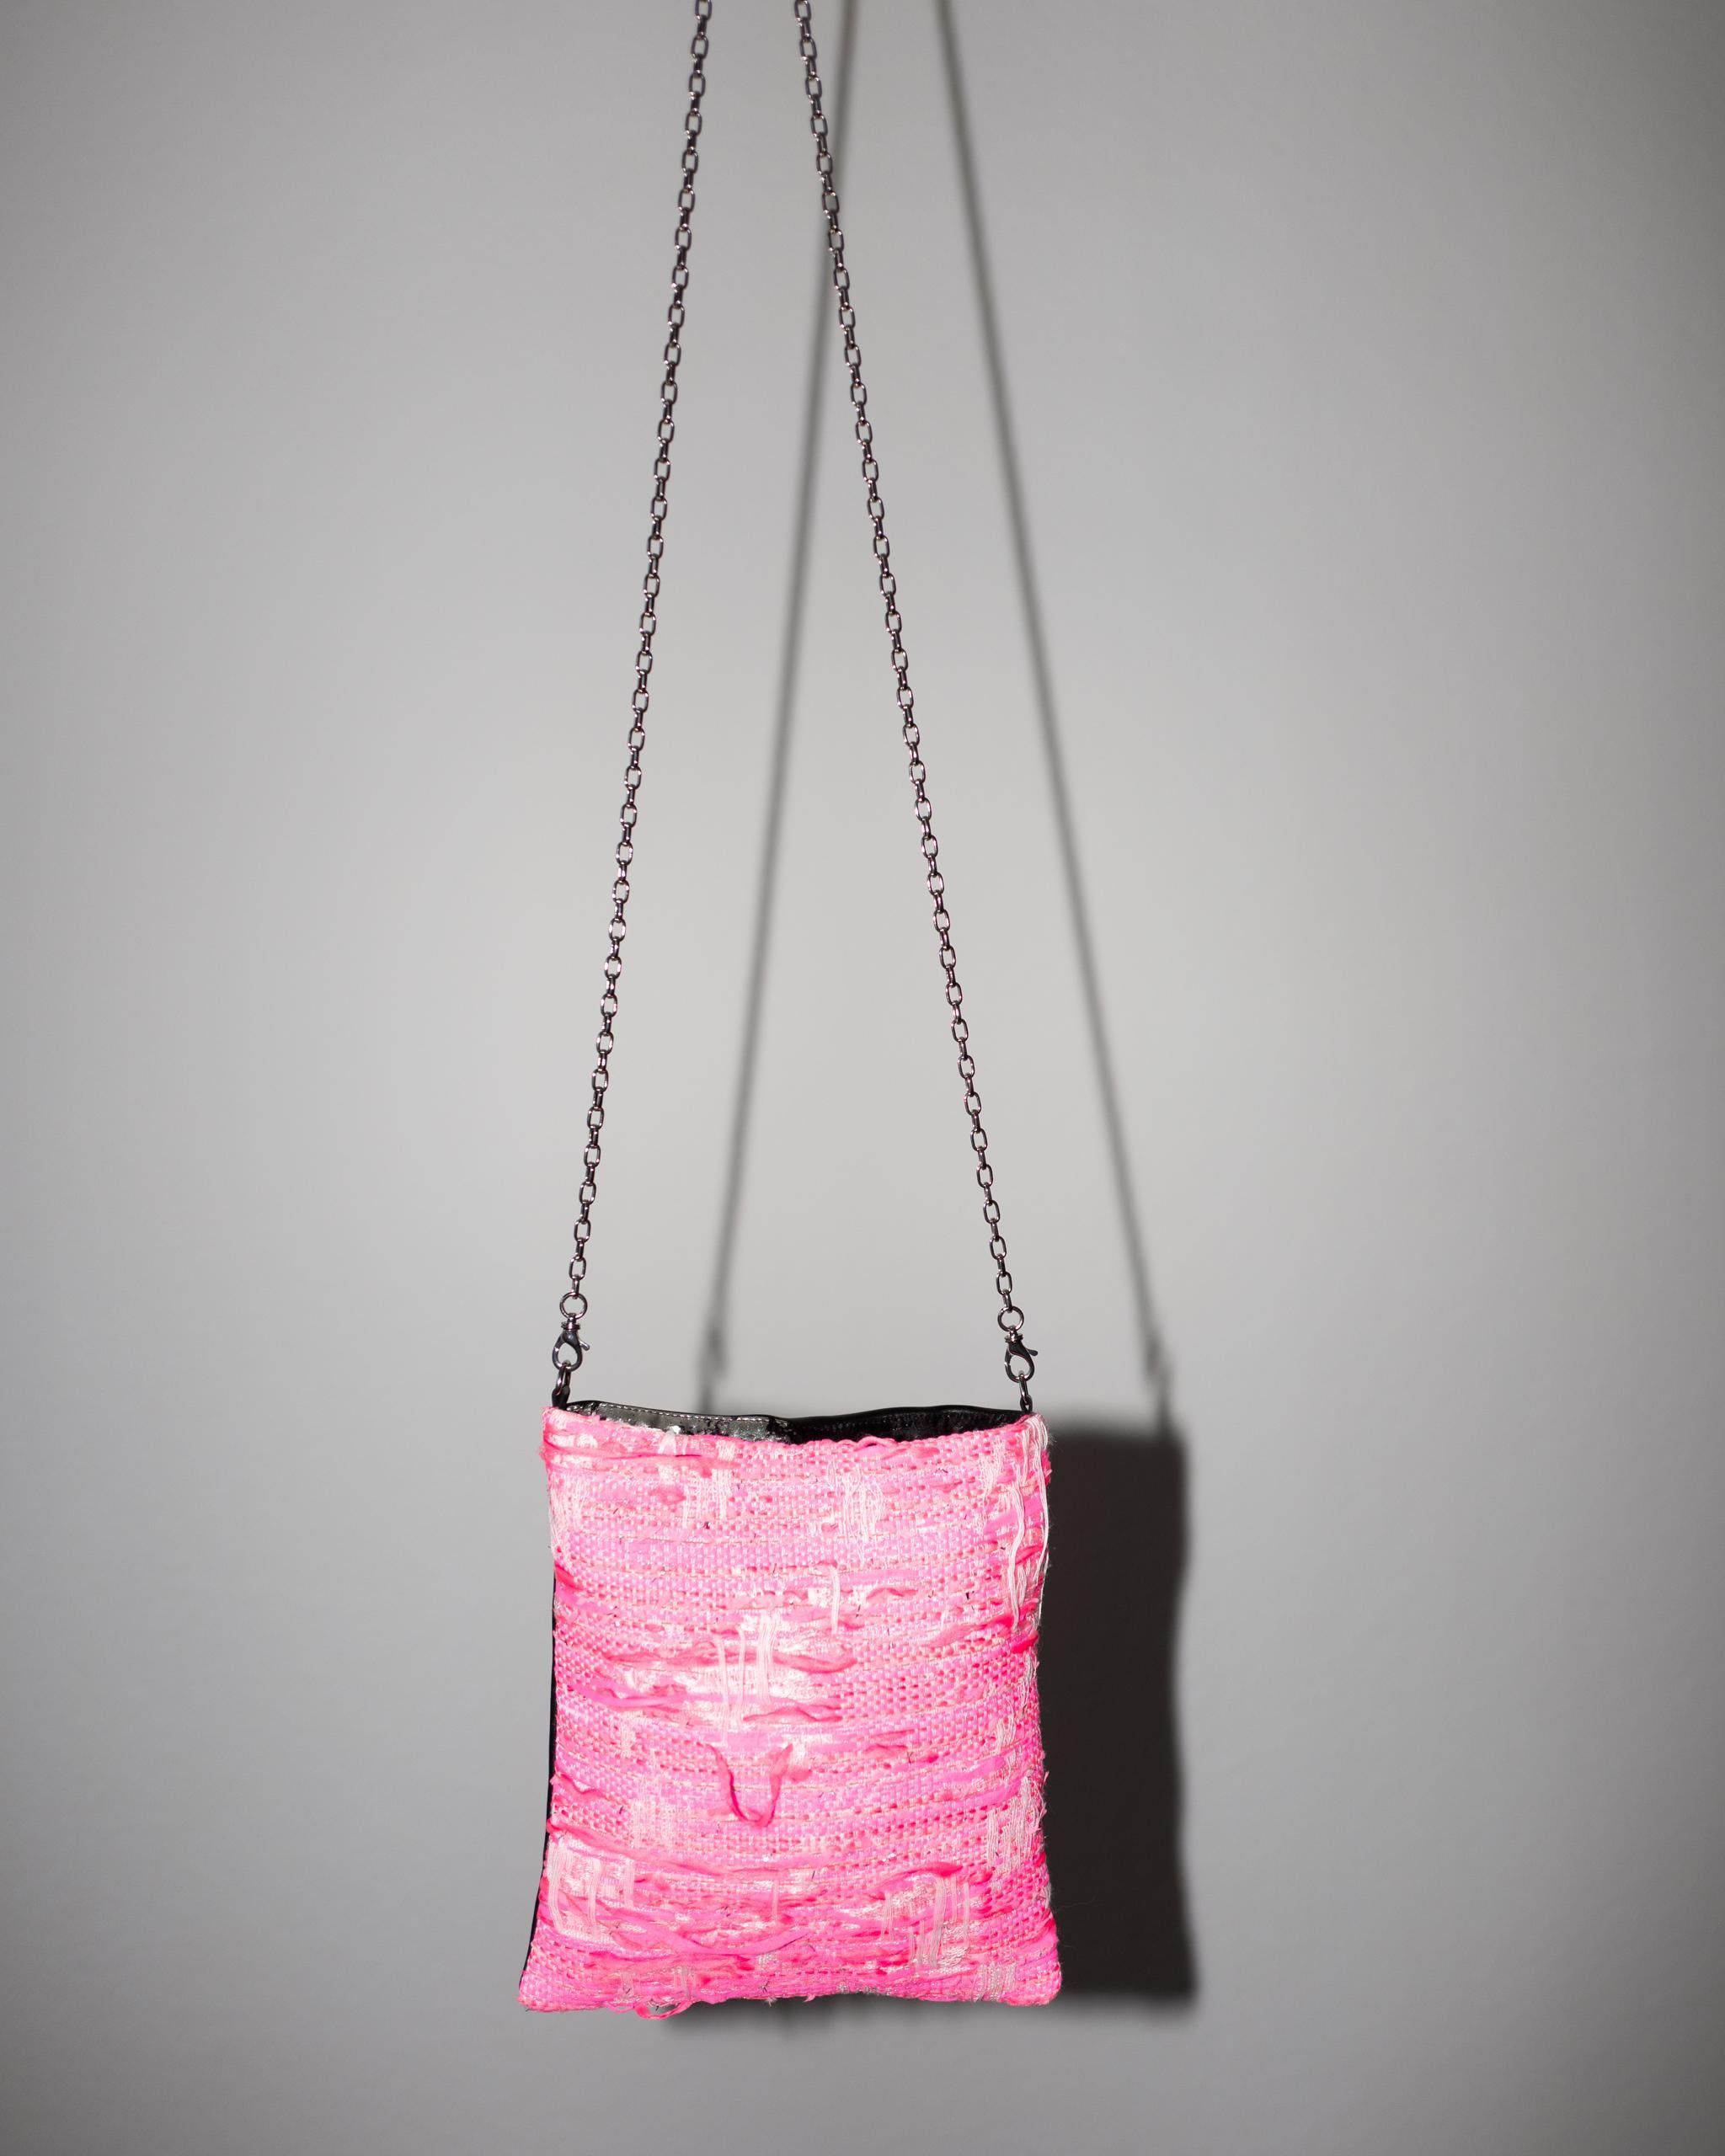 Neon Pink Tweed Black Italian Napa Leather Palladium Chain Shoulder Bag In New Condition For Sale In Los Angeles, CA